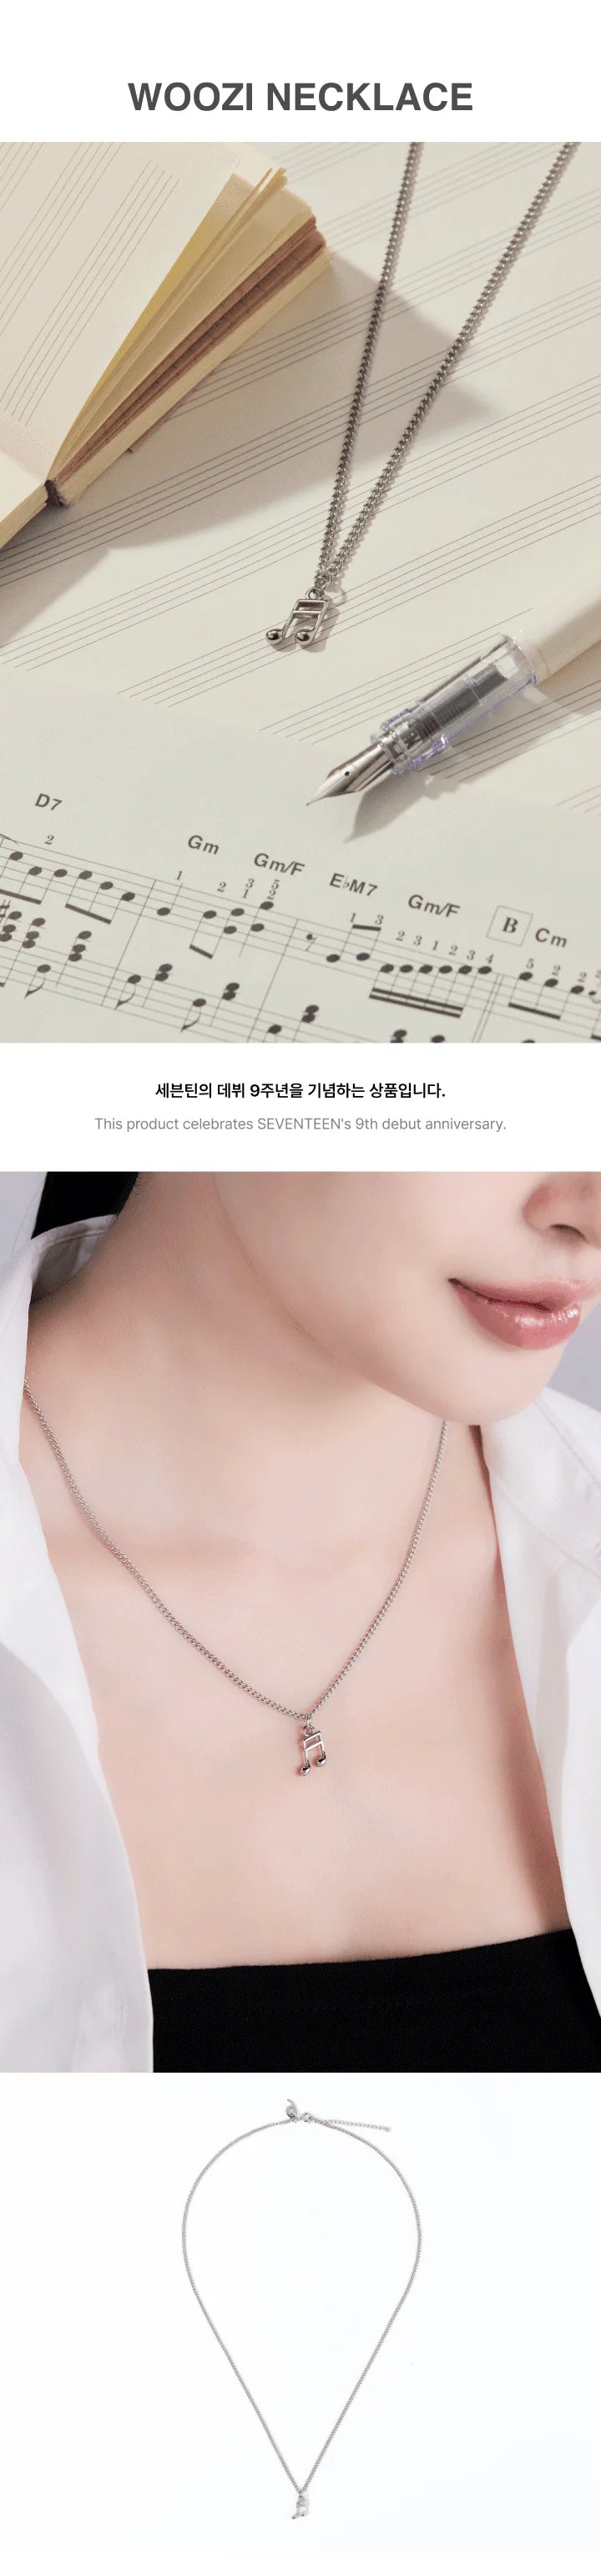 [PRE ORDER] SEVENTEEN - 9TH ANNIVERSARY (Official MD) / NECKLACE: WOOZI 